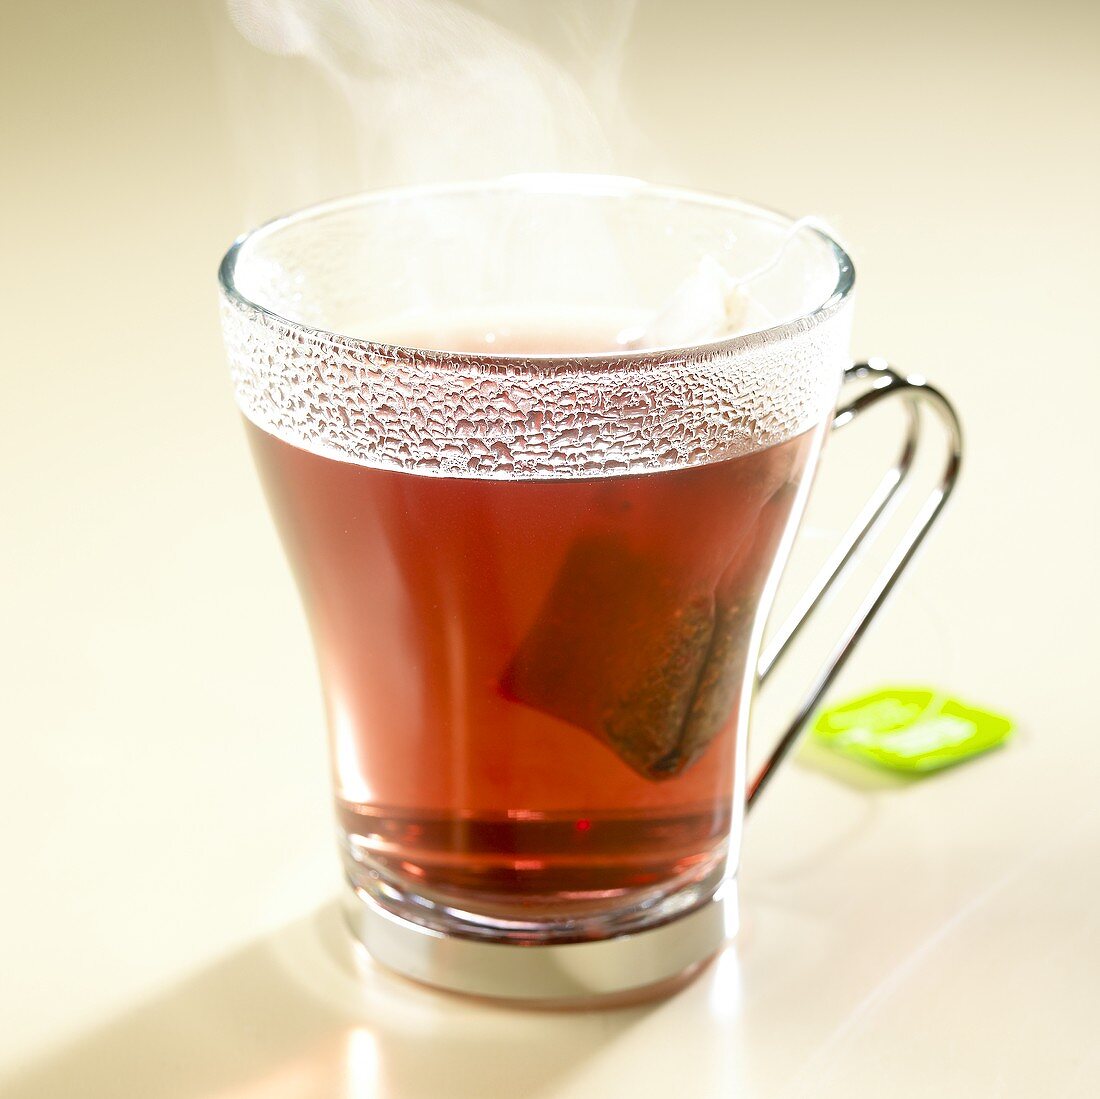 Hot herb tea with tea bag in glass